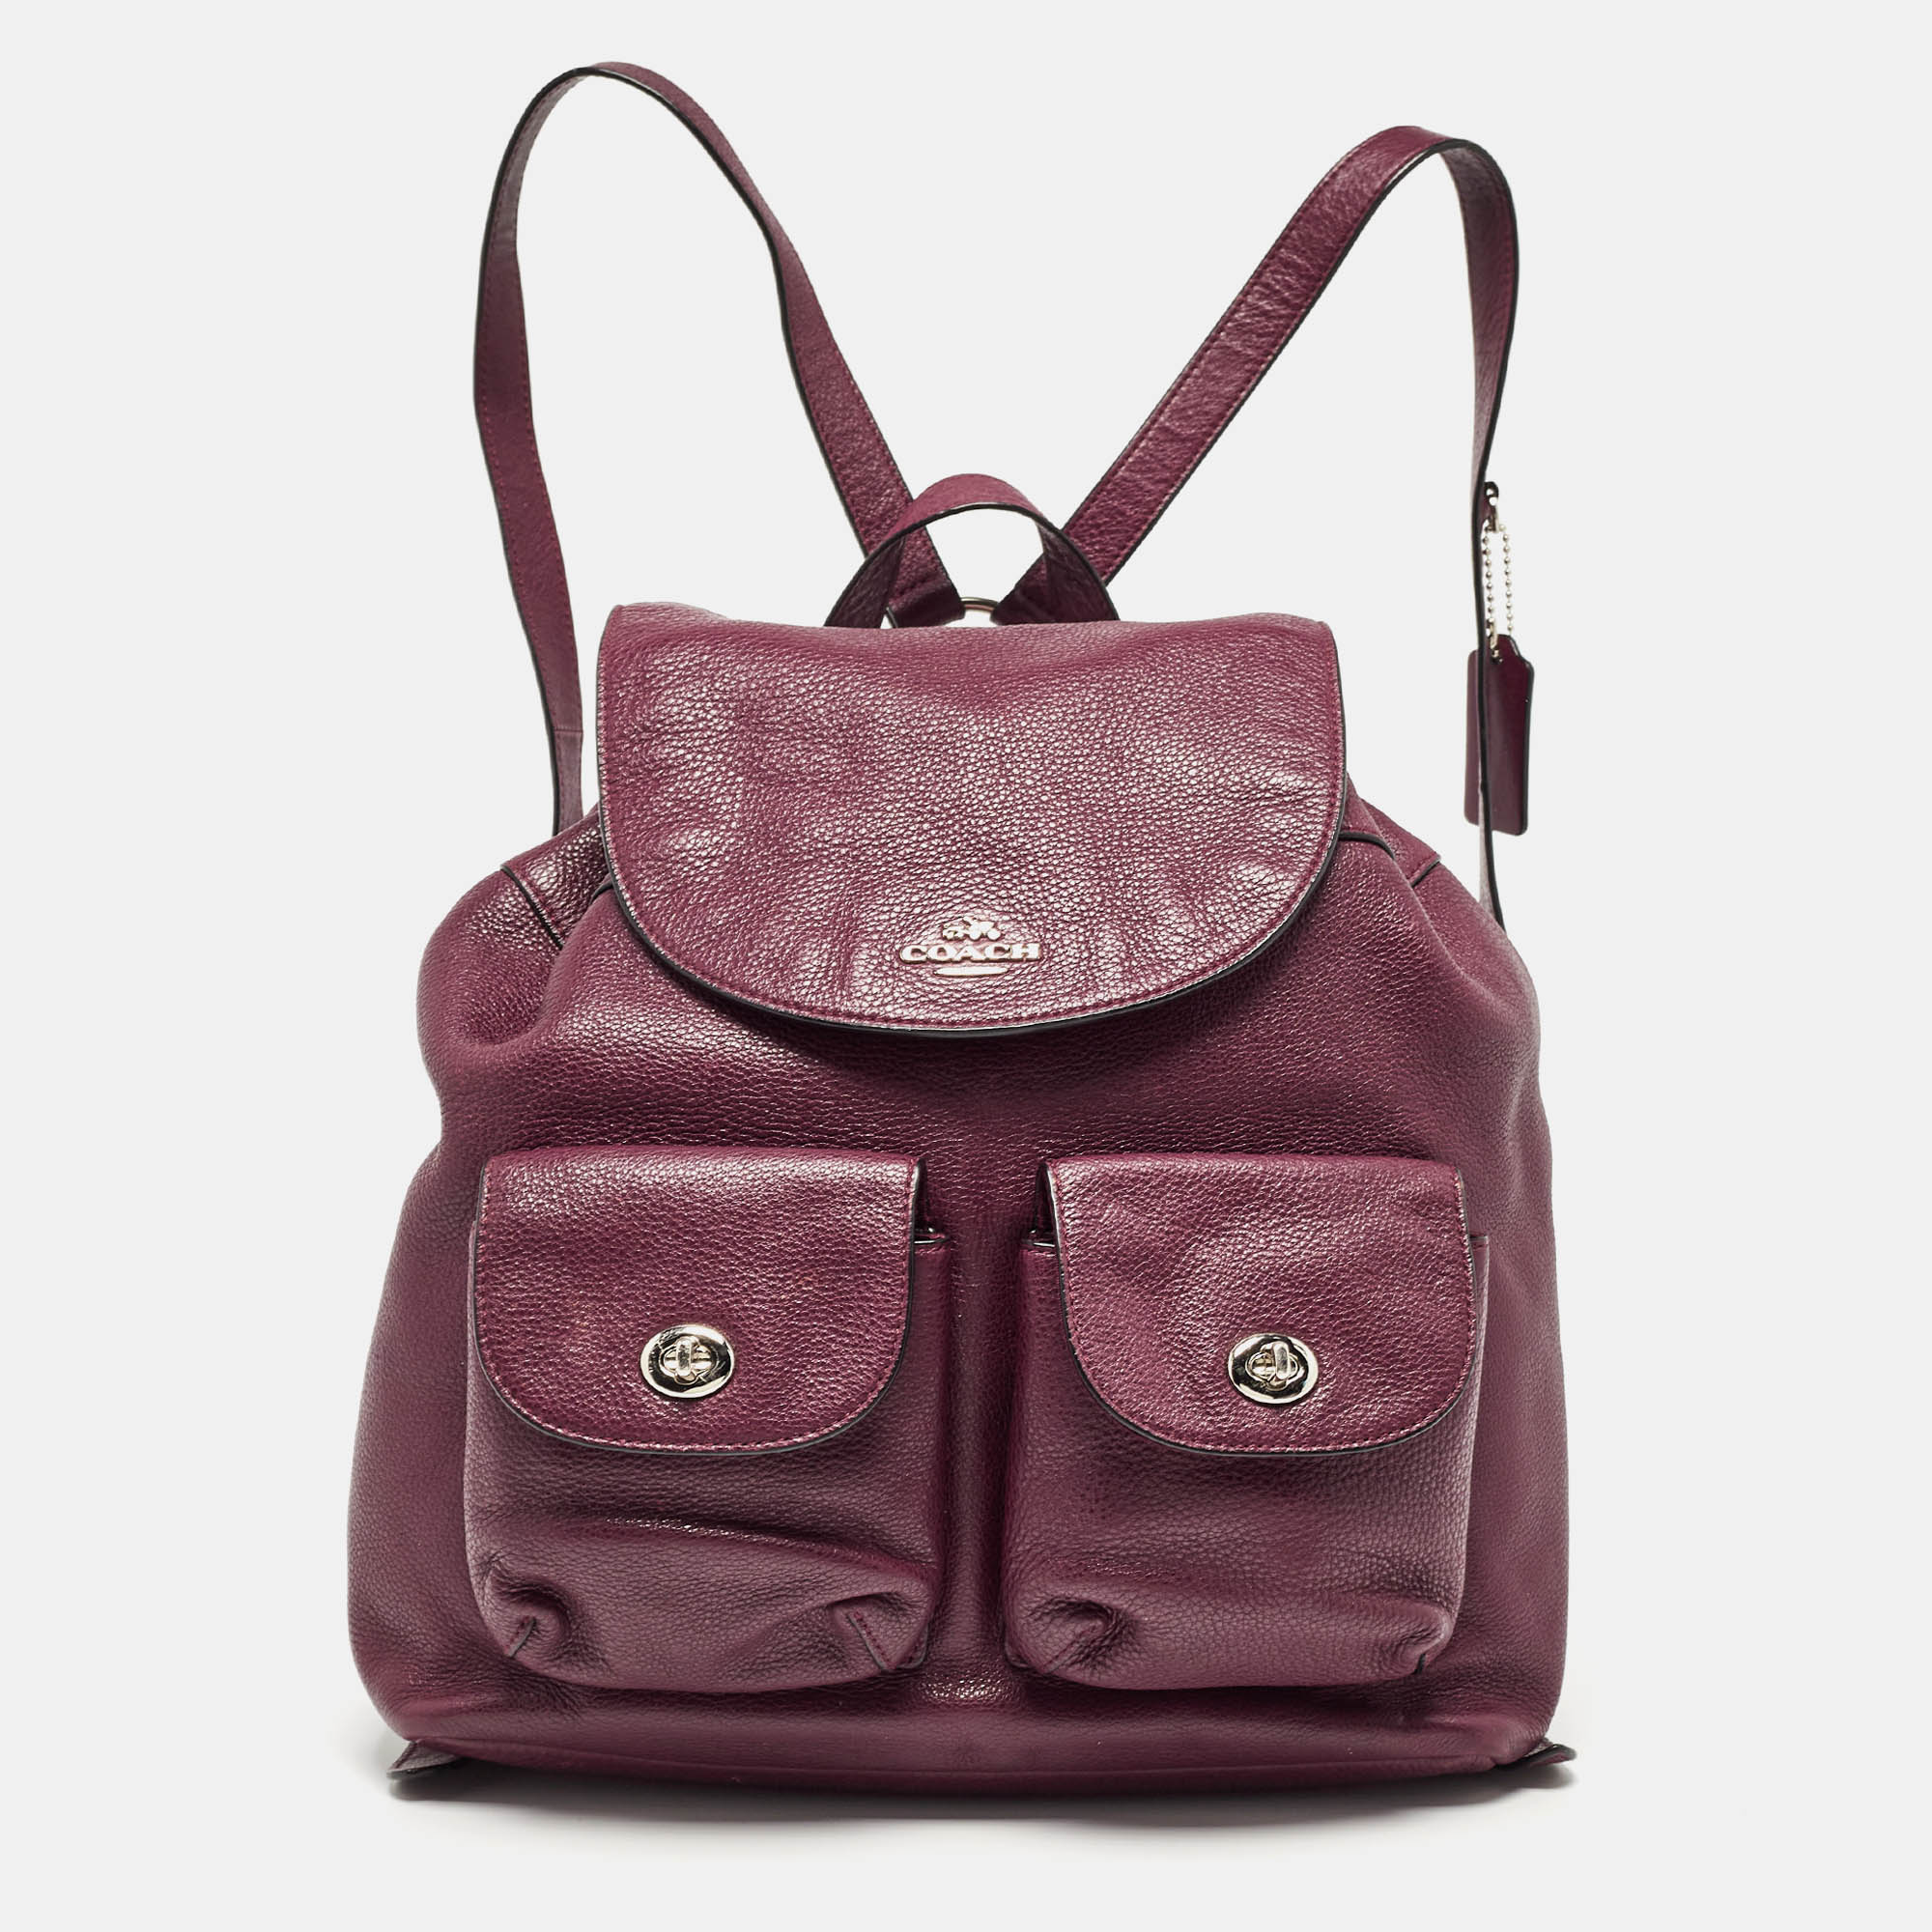 Pre-owned Coach Burgundy Leather Drawstring Backpack